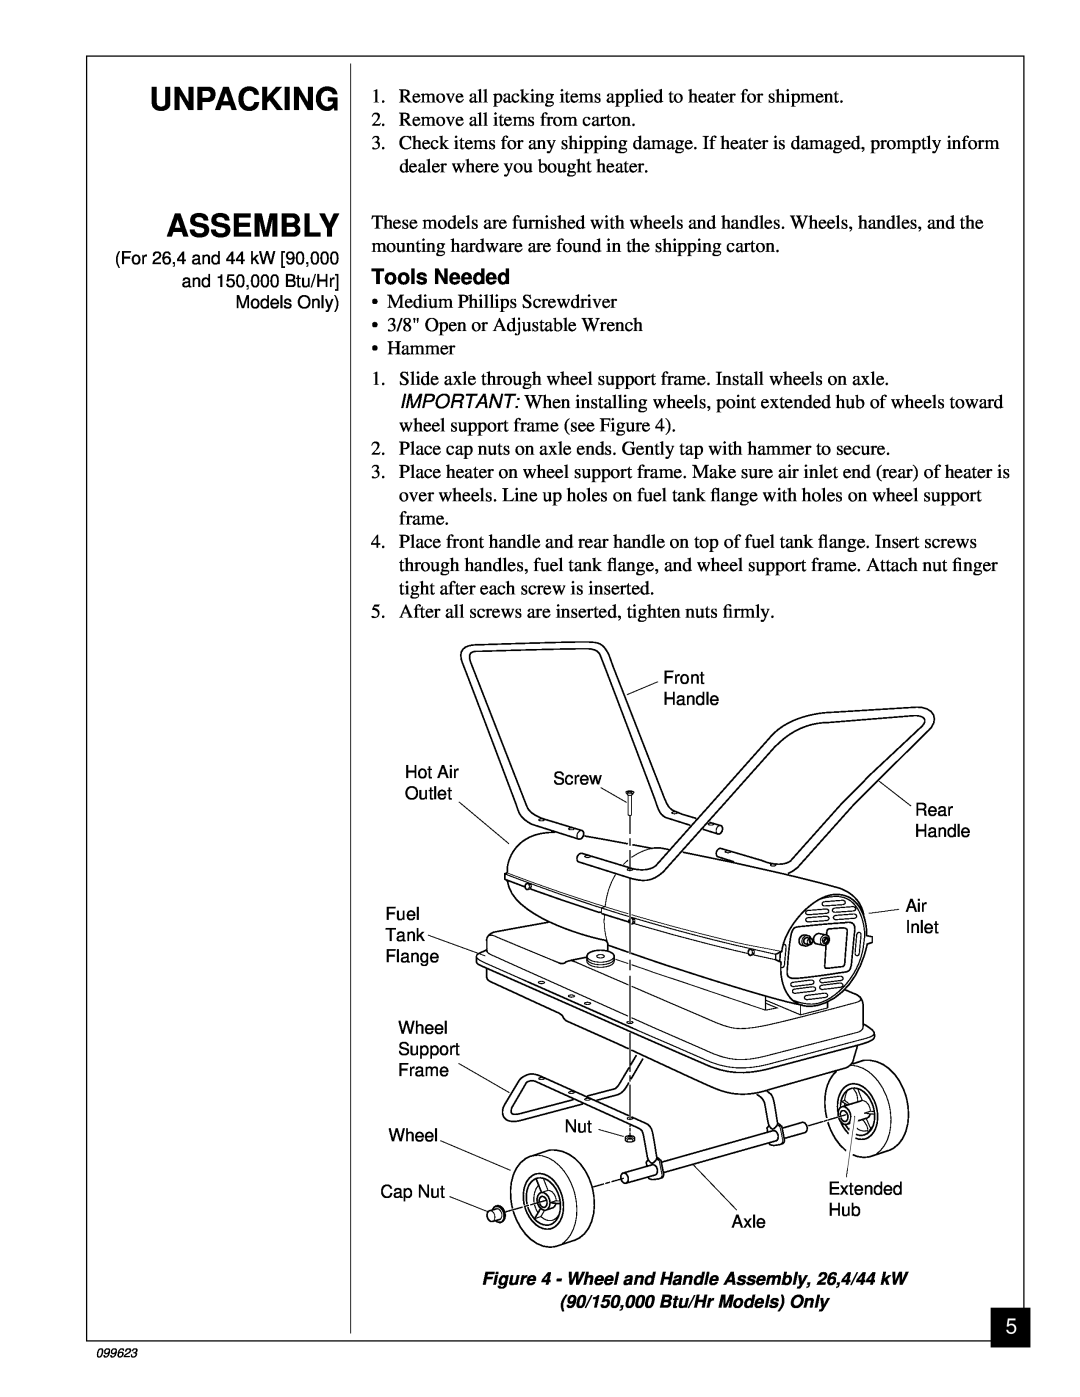 Desa 20, 44 kW (150, 8 (30, 5 (70, 4 (90, 26, 000 Btu/Hr) owner manual Unpacking Assembly, Tools Needed 